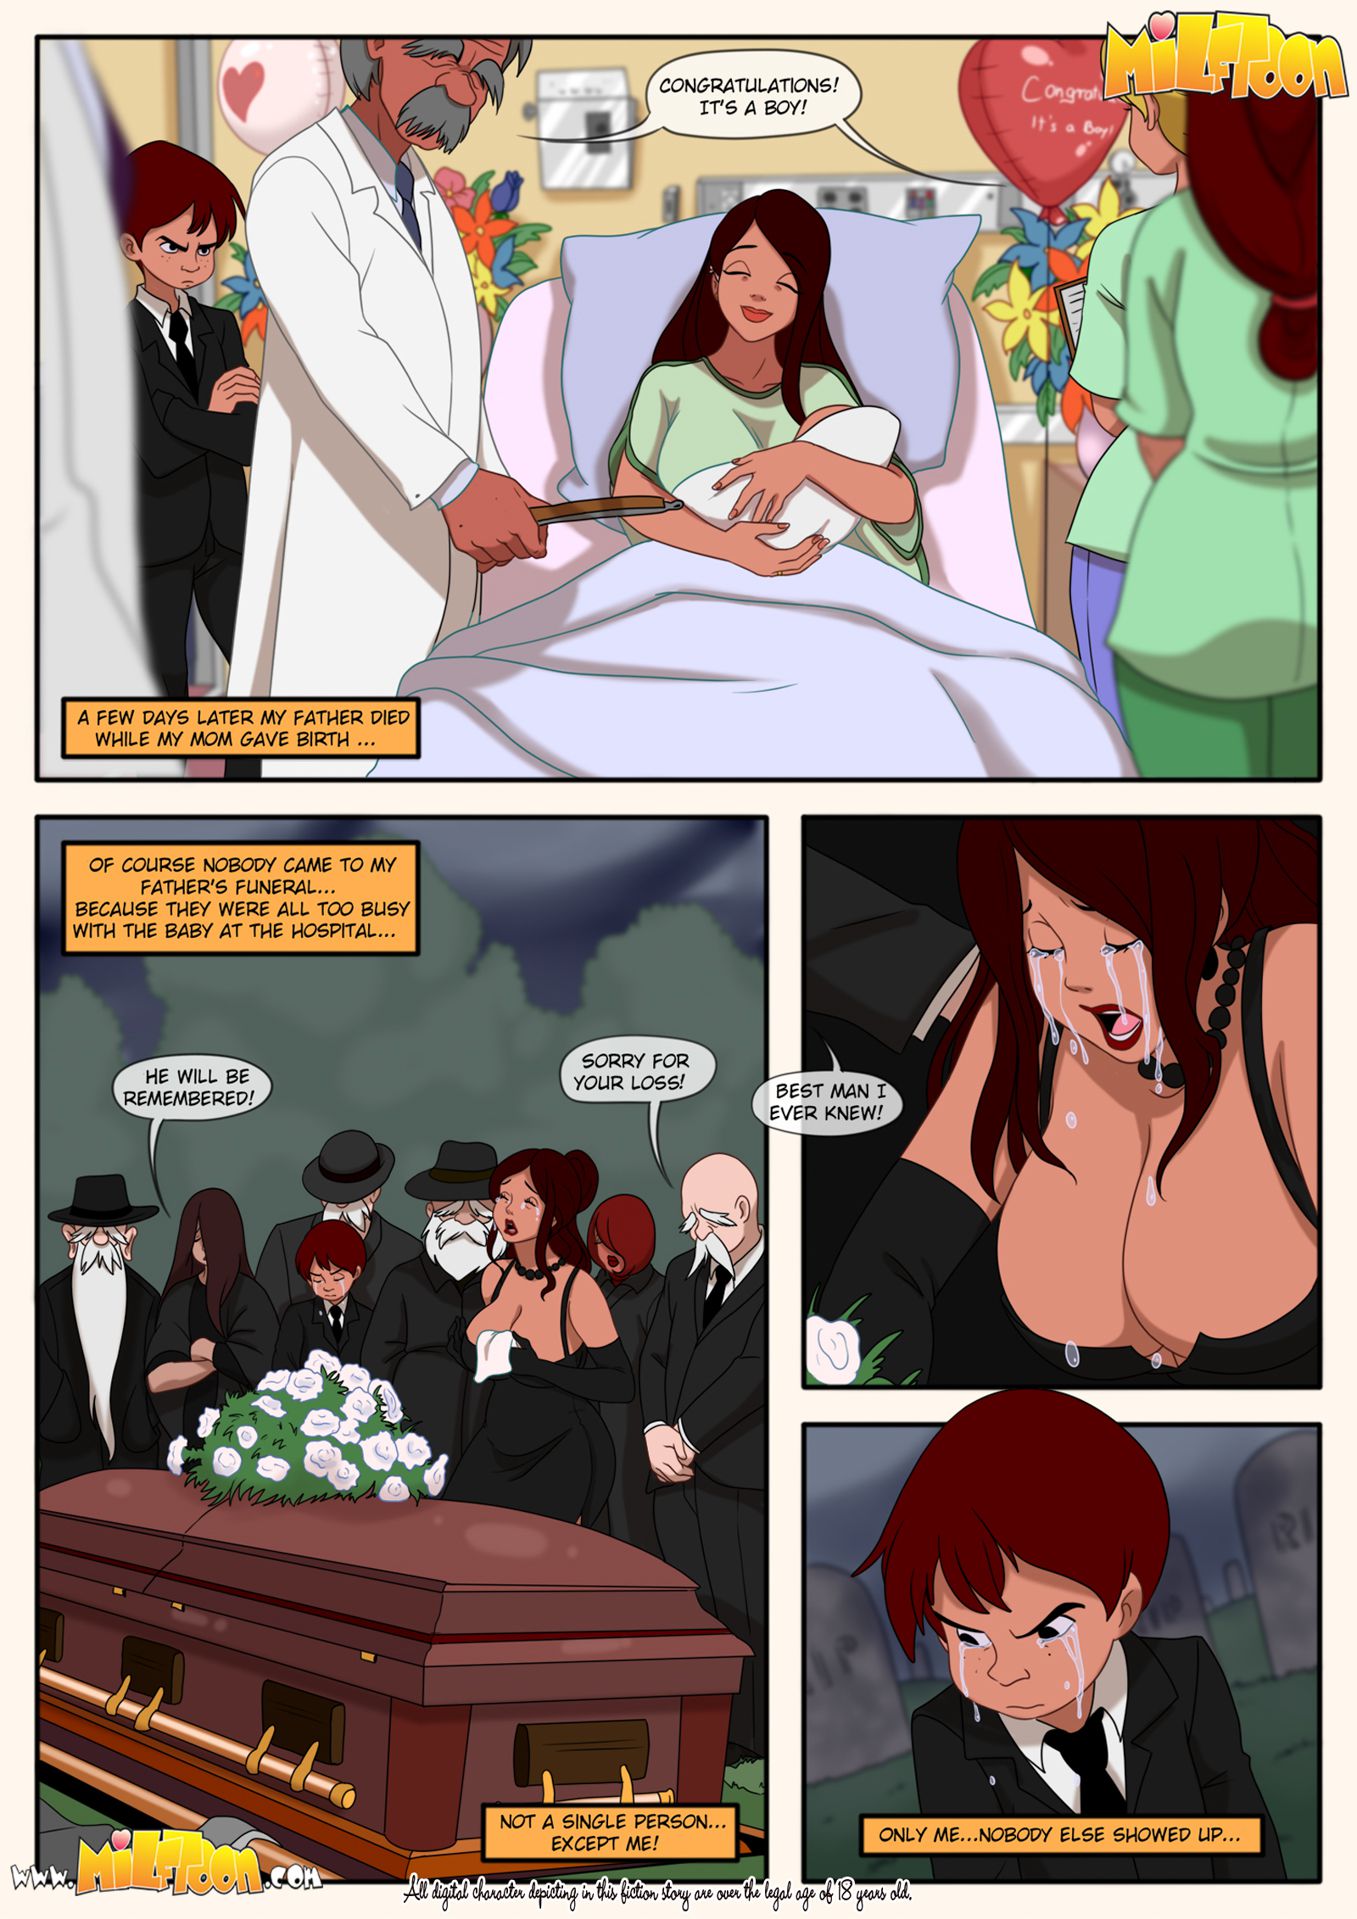 Arranged Marriage [MILFToon] - 4 . Arranged Marriage - Chapter 4 [MILFToon]  - AllPornComic